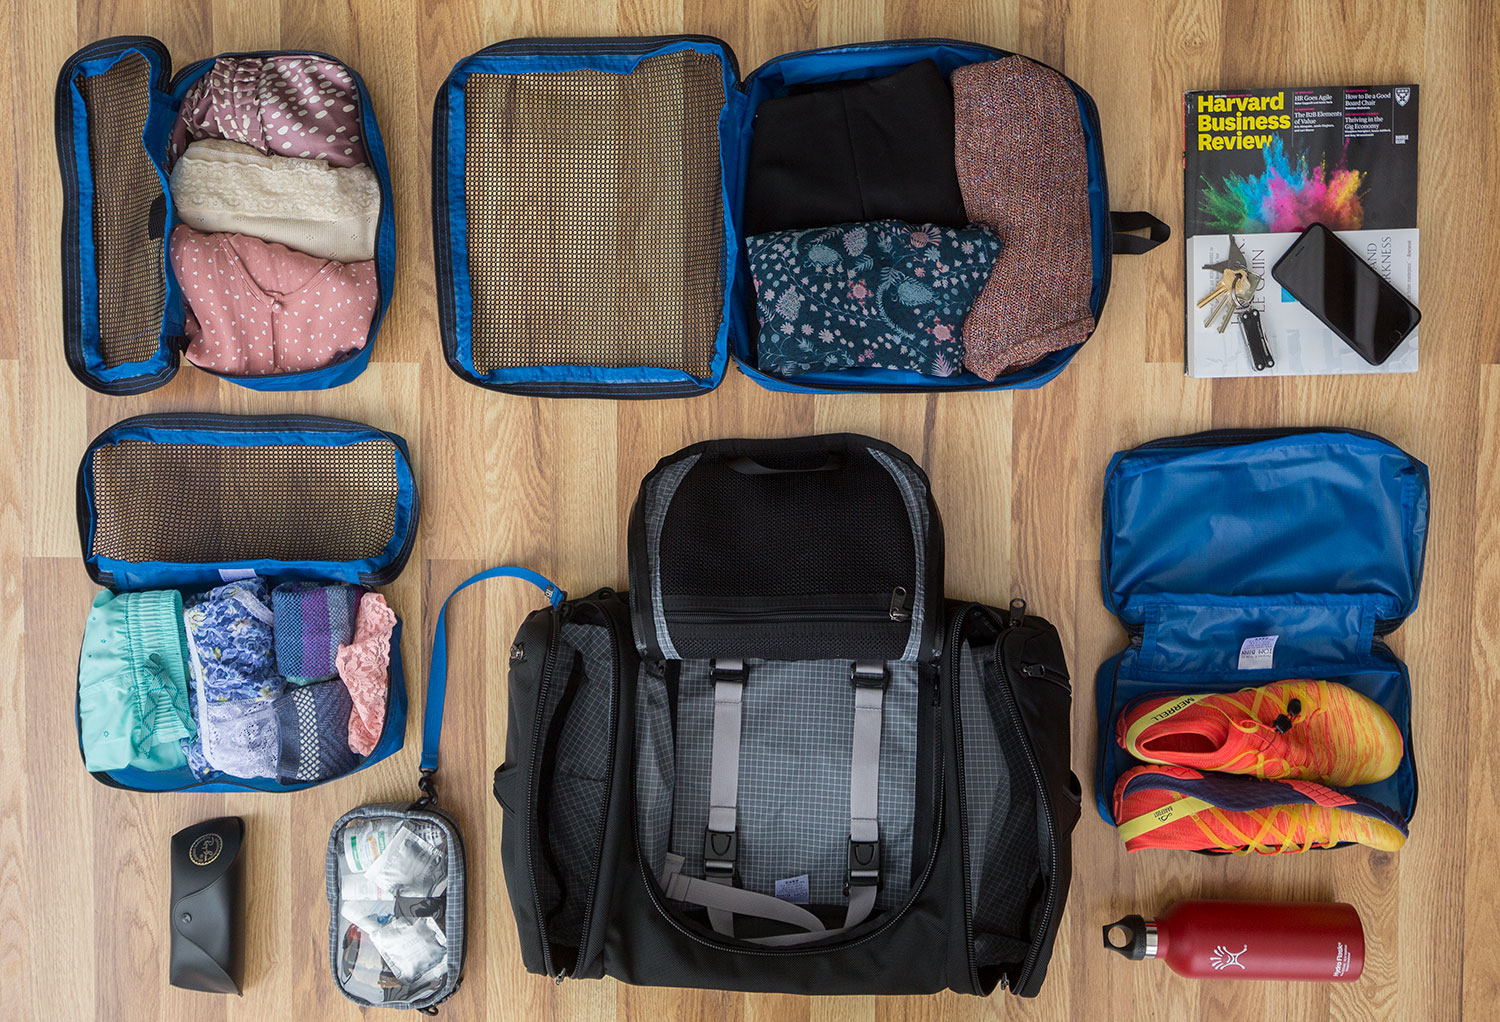 packing things and organize in a travel bag